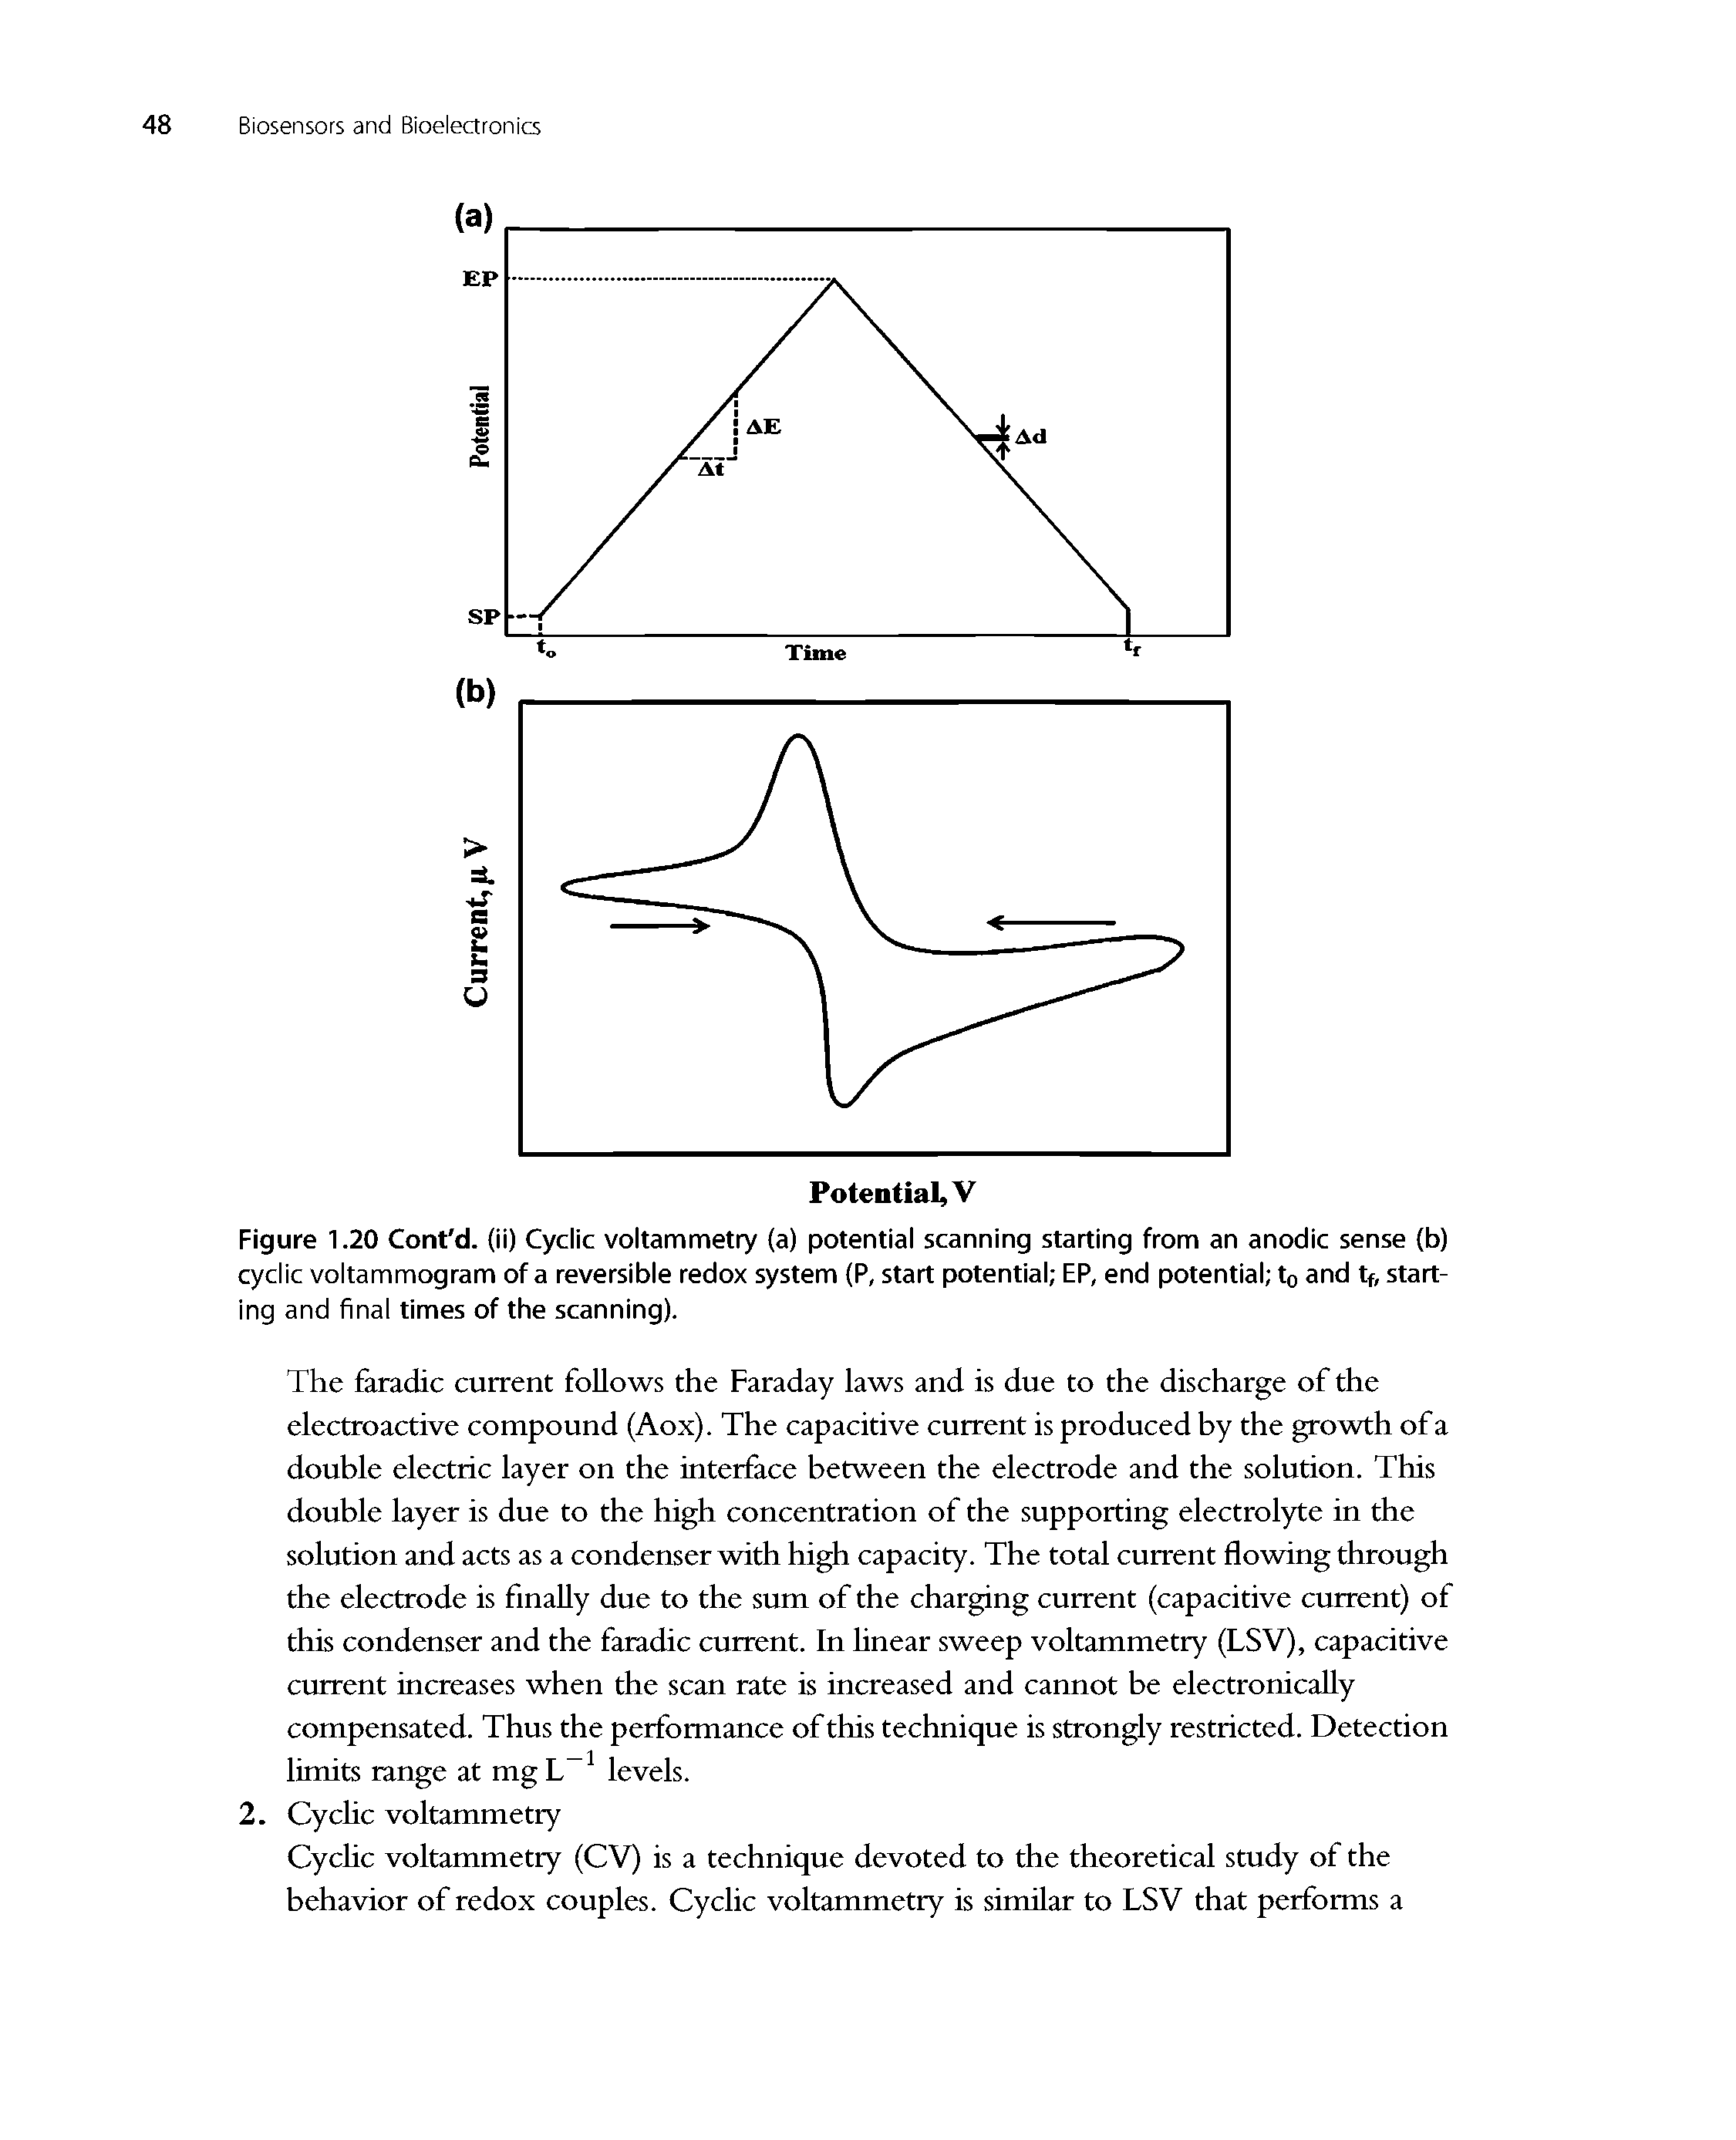 Figure 1.20 Cont d. (ii) Cyclic voltammetry (a) potential scanning starting from an anodic sense (b) cyclic voltammogram of a reversible redox system (P, start potential EP, end potential to and tf, starting and final times of the scanning).